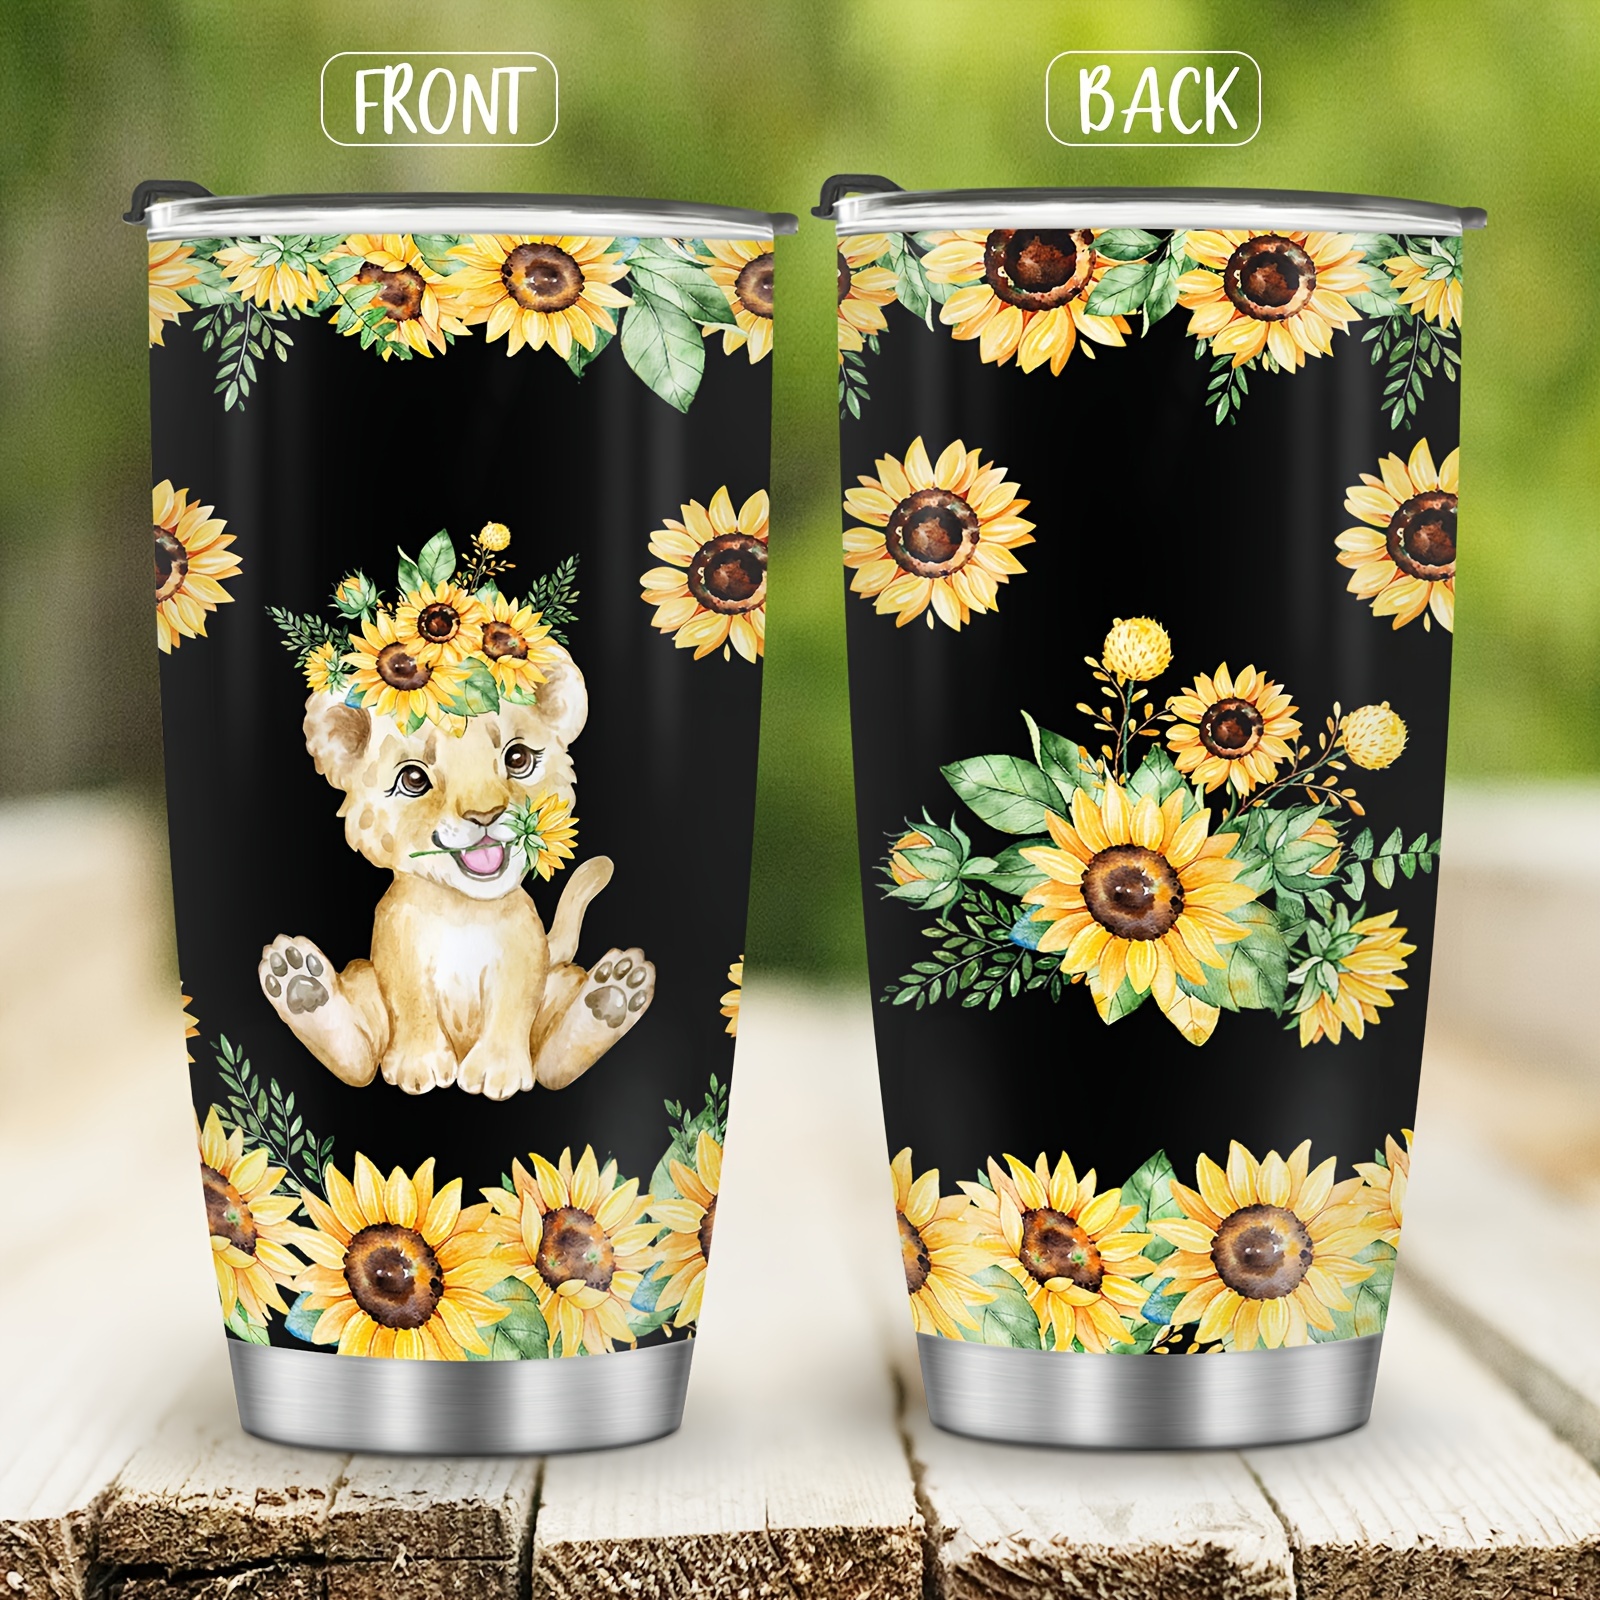 Sunflower Faith Tumbler Cup with Lid - Funny Gifts for Men Women - Festival  Birthday Gifts for Dad Mom - 20 Oz Insulated Travel Coffee Mug